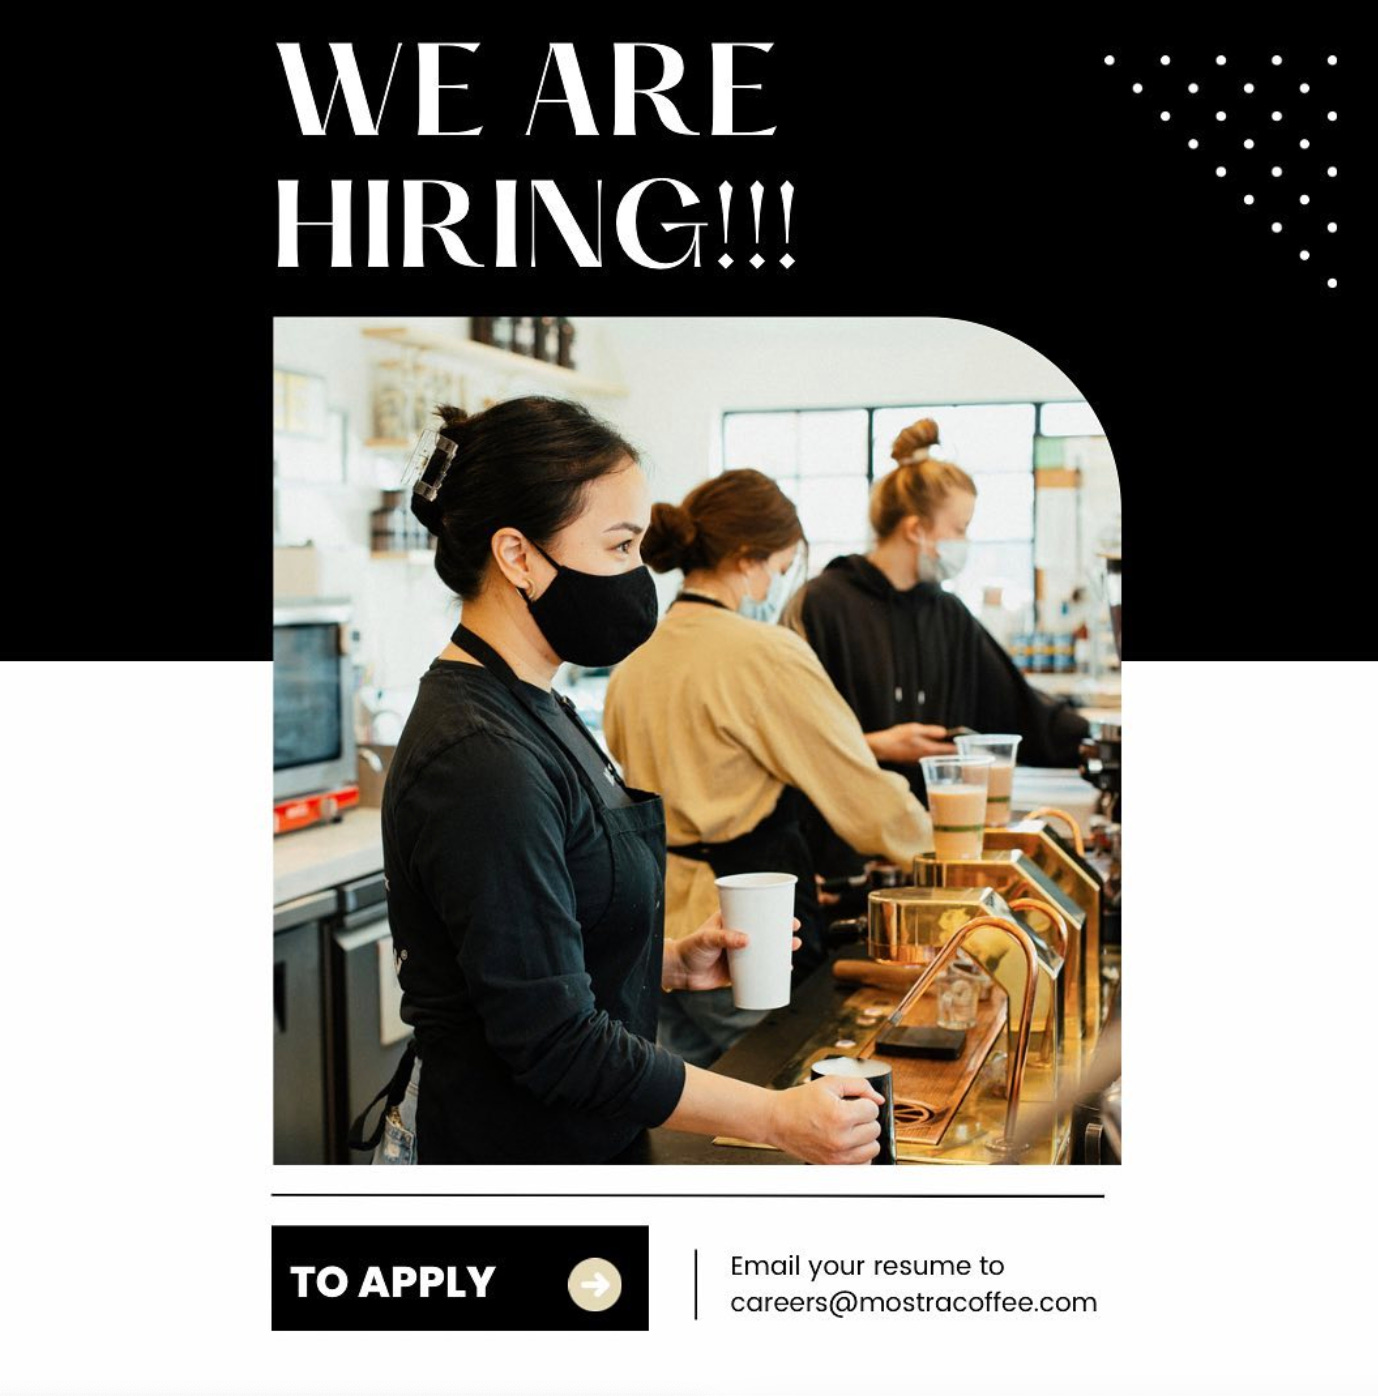 Now Hiring flyer for Mostra Coffee Company.